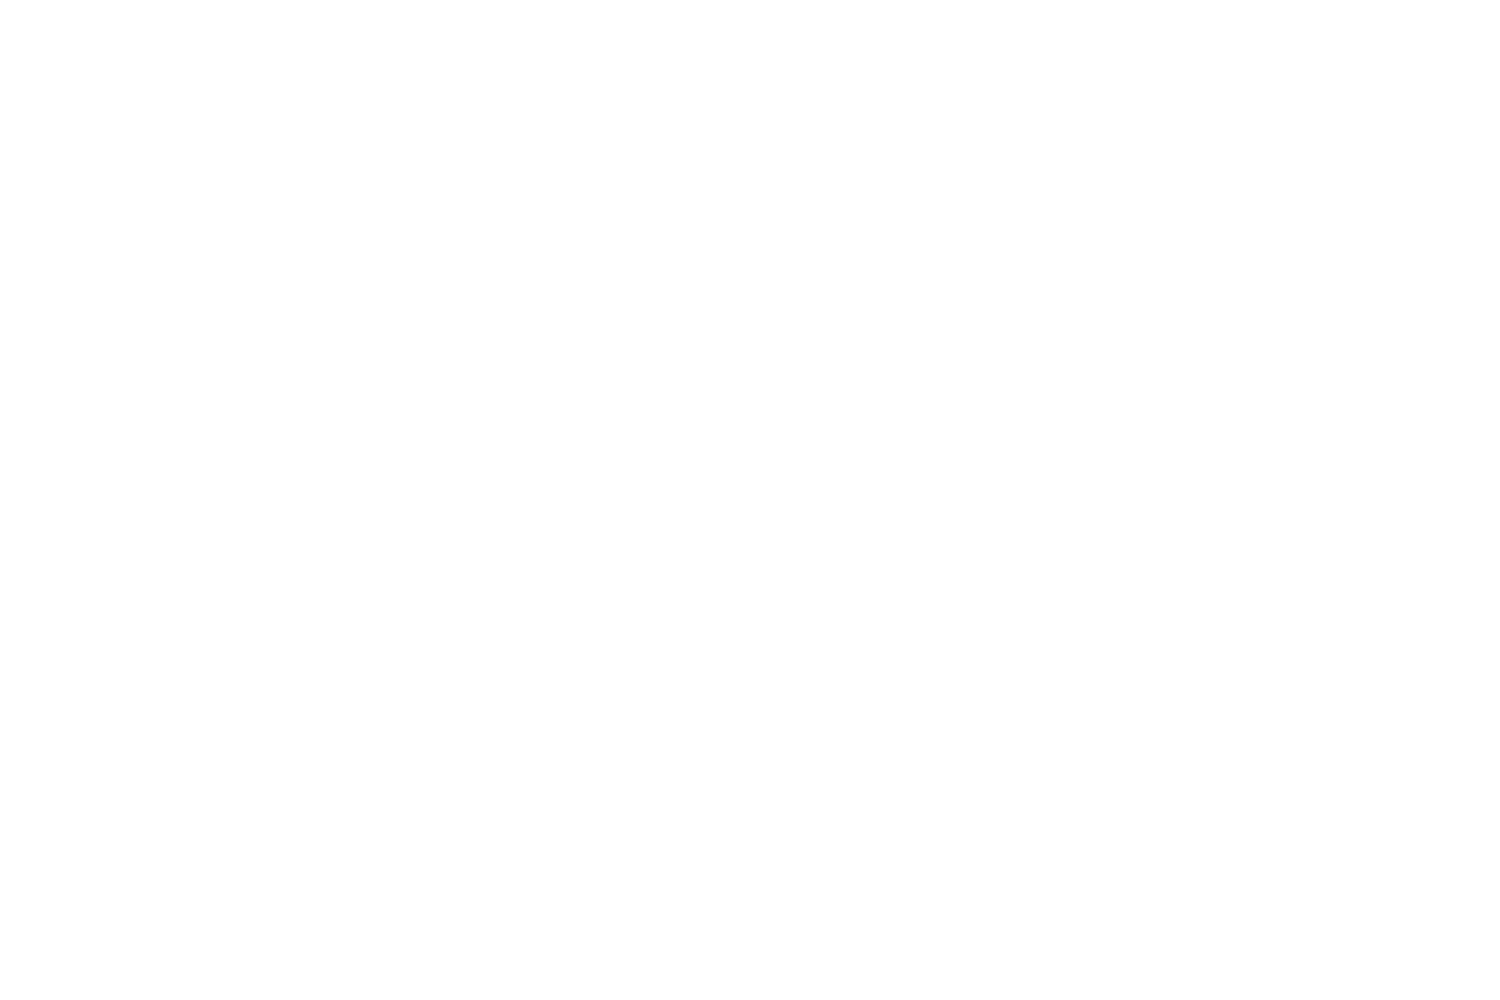 Qreative Concepts